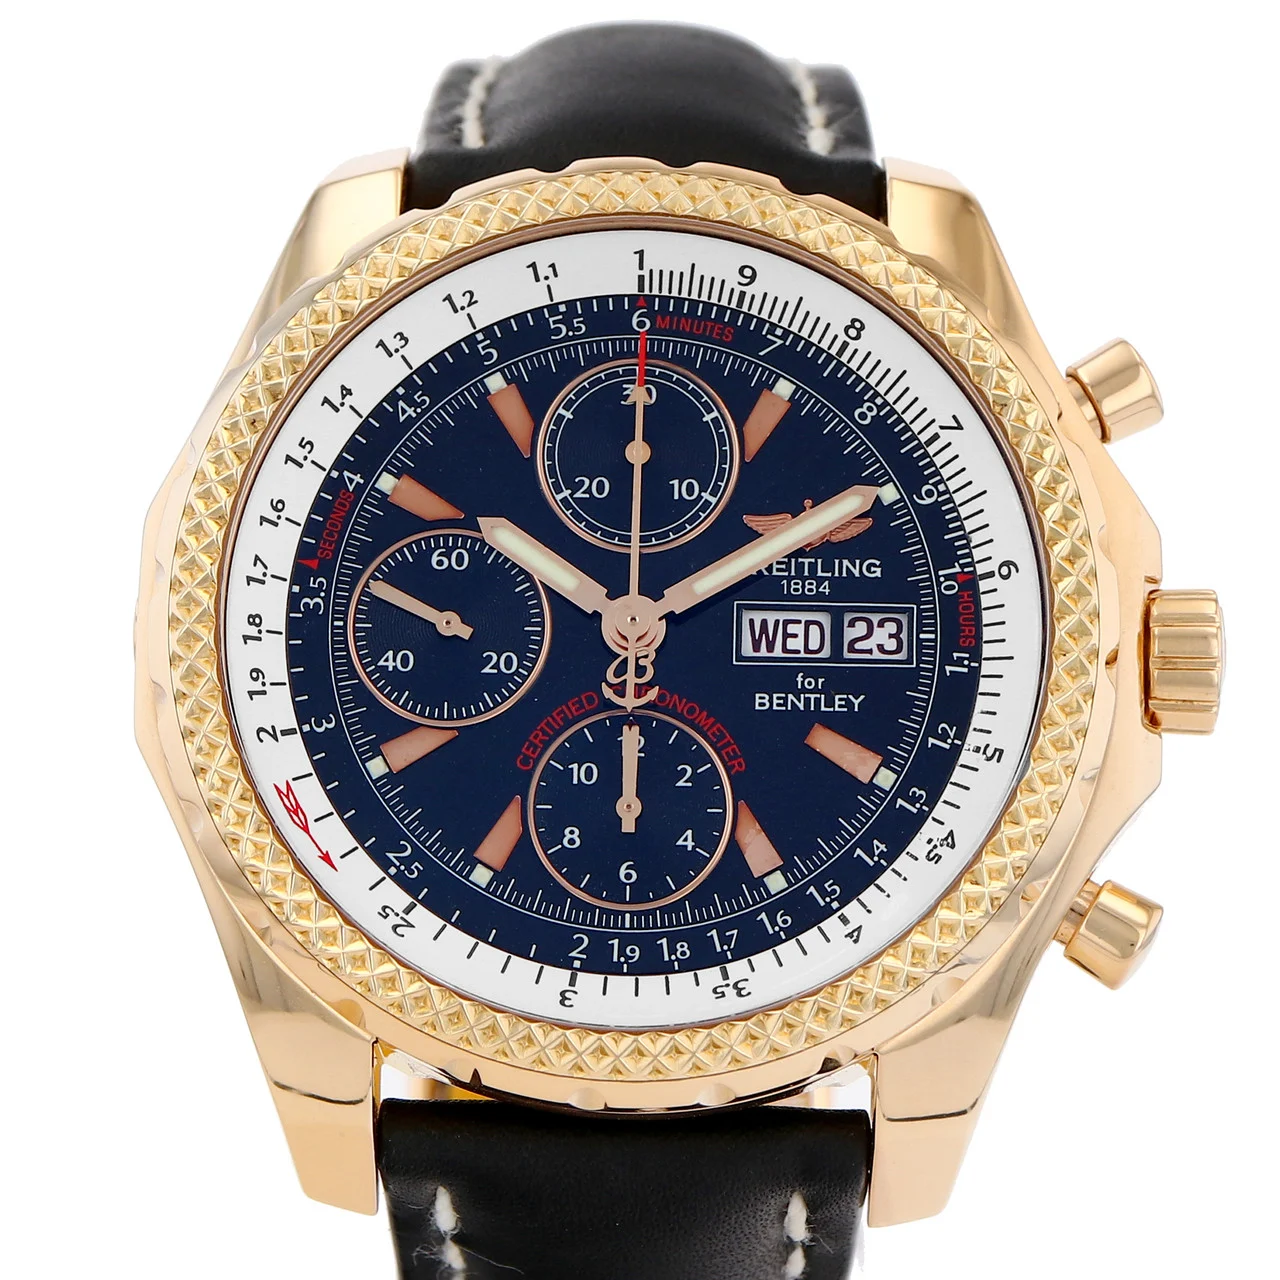 2015 Breitling Bentley Continental GT 46 Yellow Gold / Black / Strap - Limited to 500 Pieces H13363  Listing Image 1